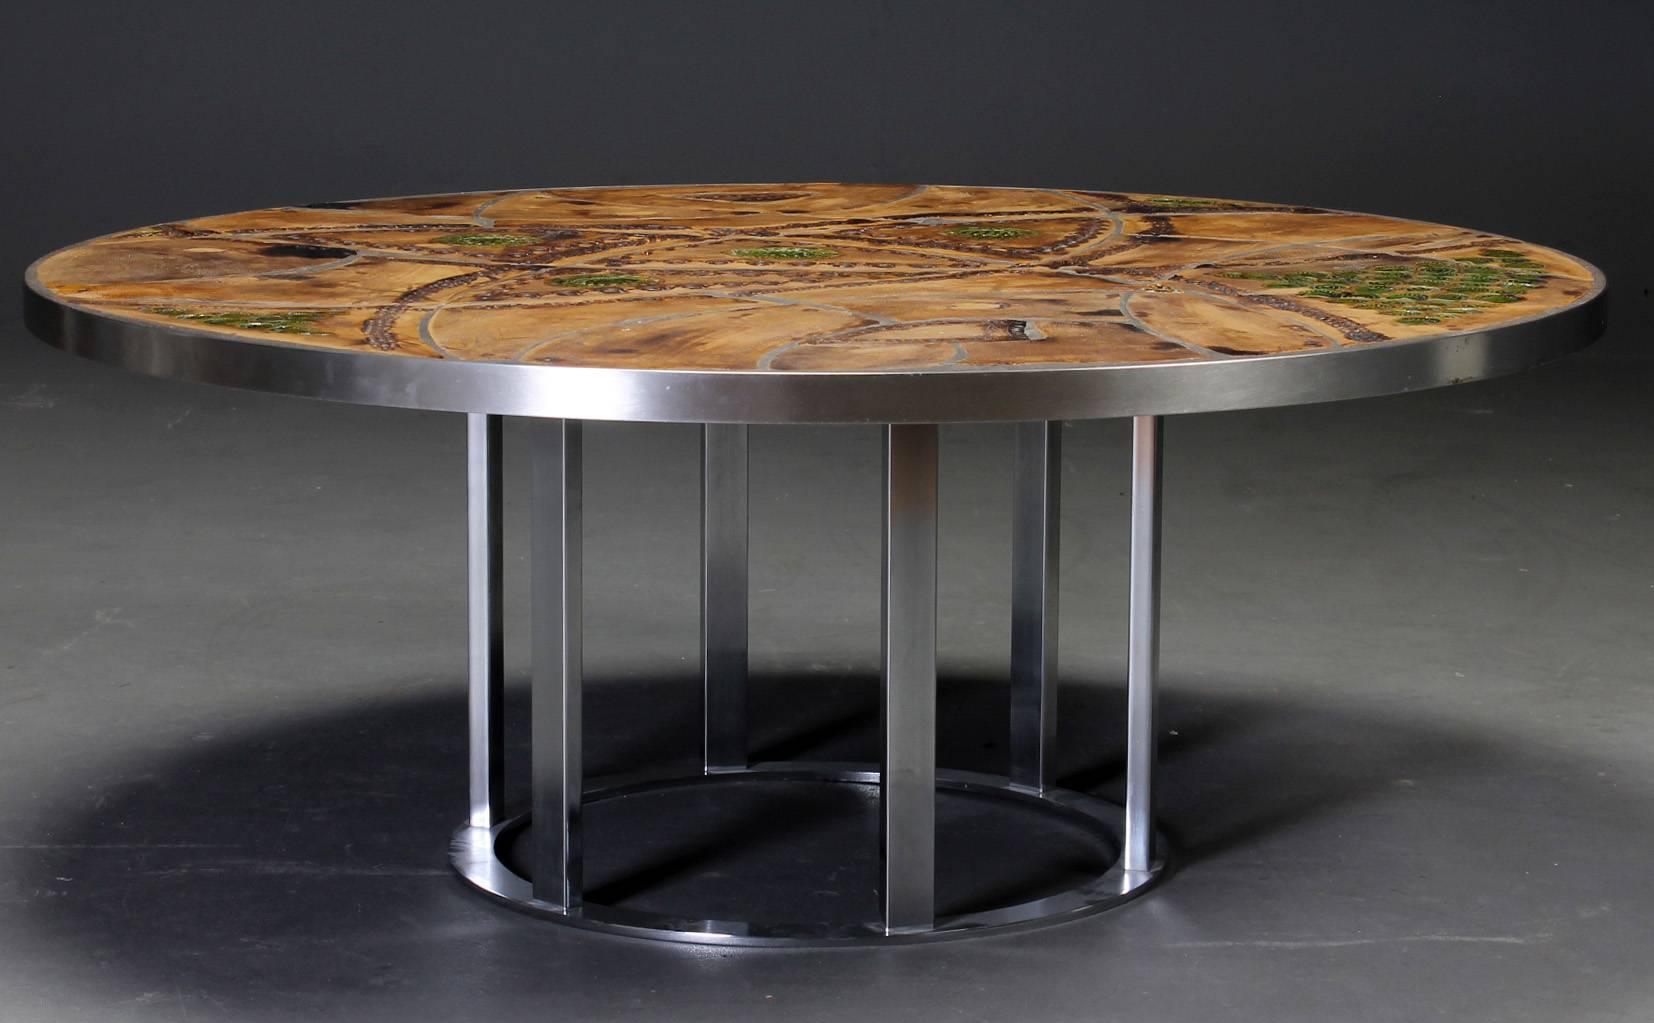 Lilli Just Lichtenberg, Denmark from the 1960s
Circular coffee table with steel frame, countertop with ceramic plates decorated with inspiration from the Vikings. Sign. Just Lichtenberg. 
Dimention: H. 48 .Ø 125 cm.